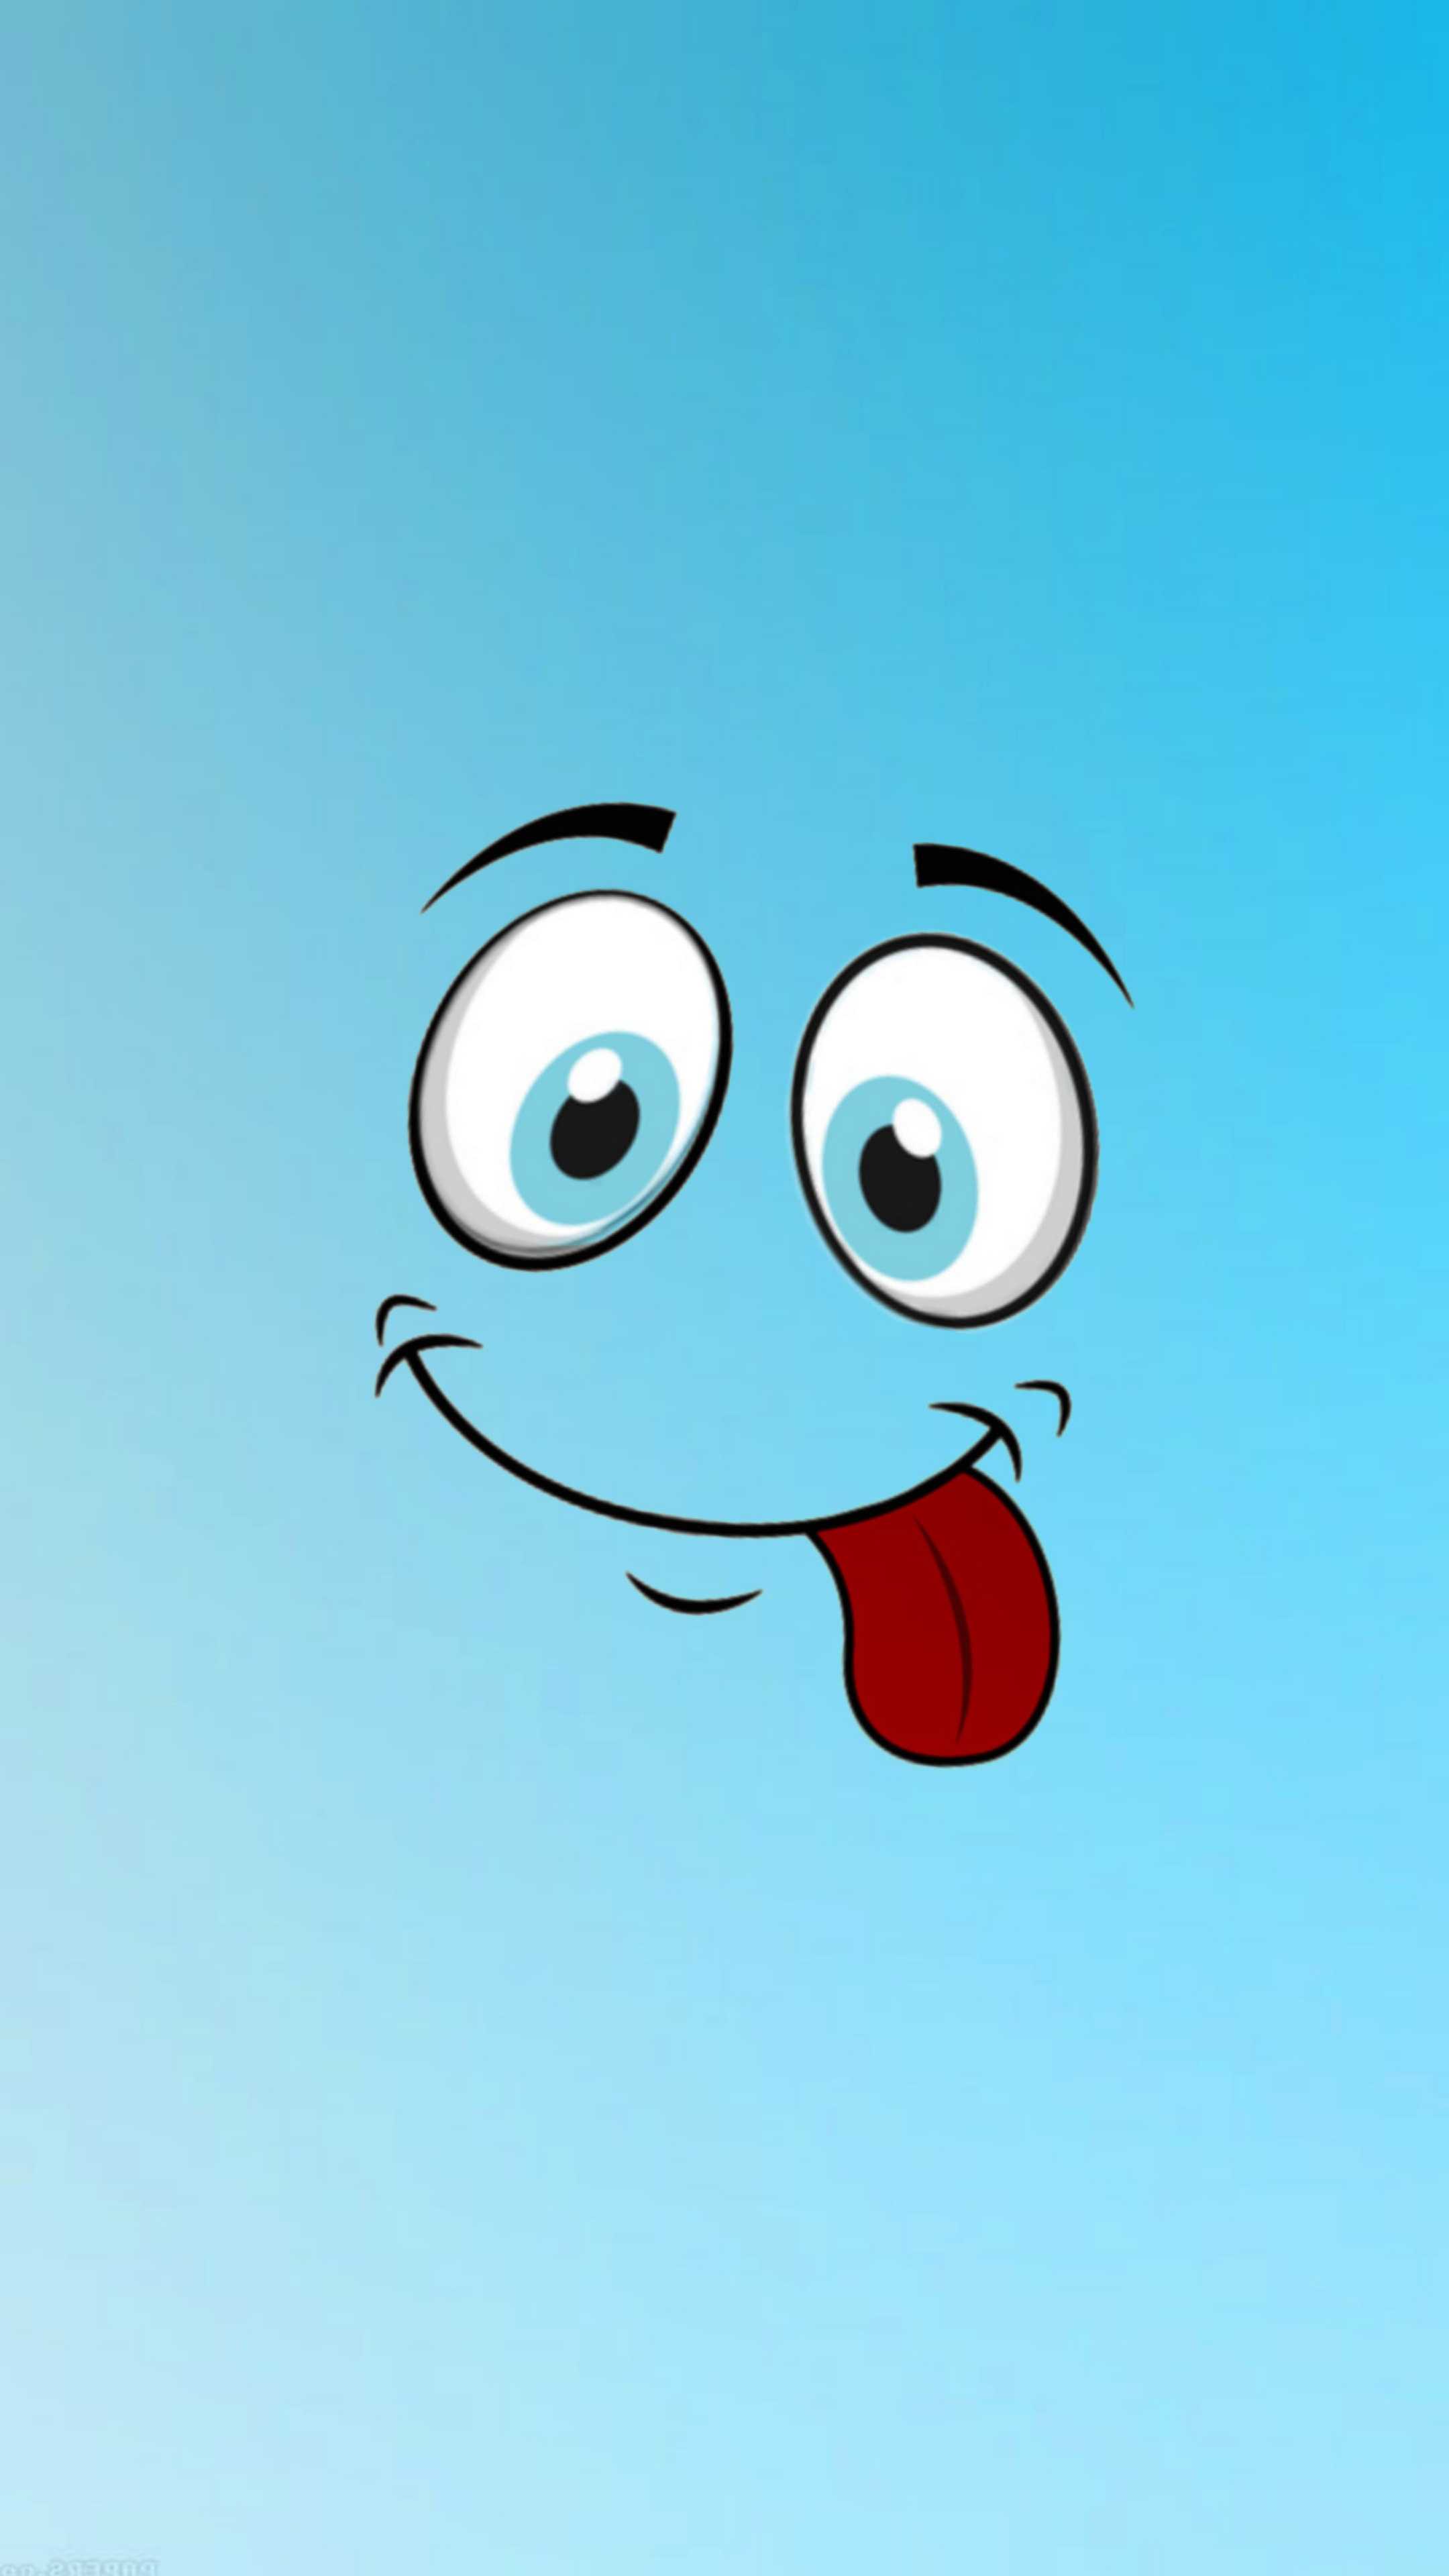 Smiley Face Wallpaper - KoLPaPer - Awesome Free HD Wallpapers